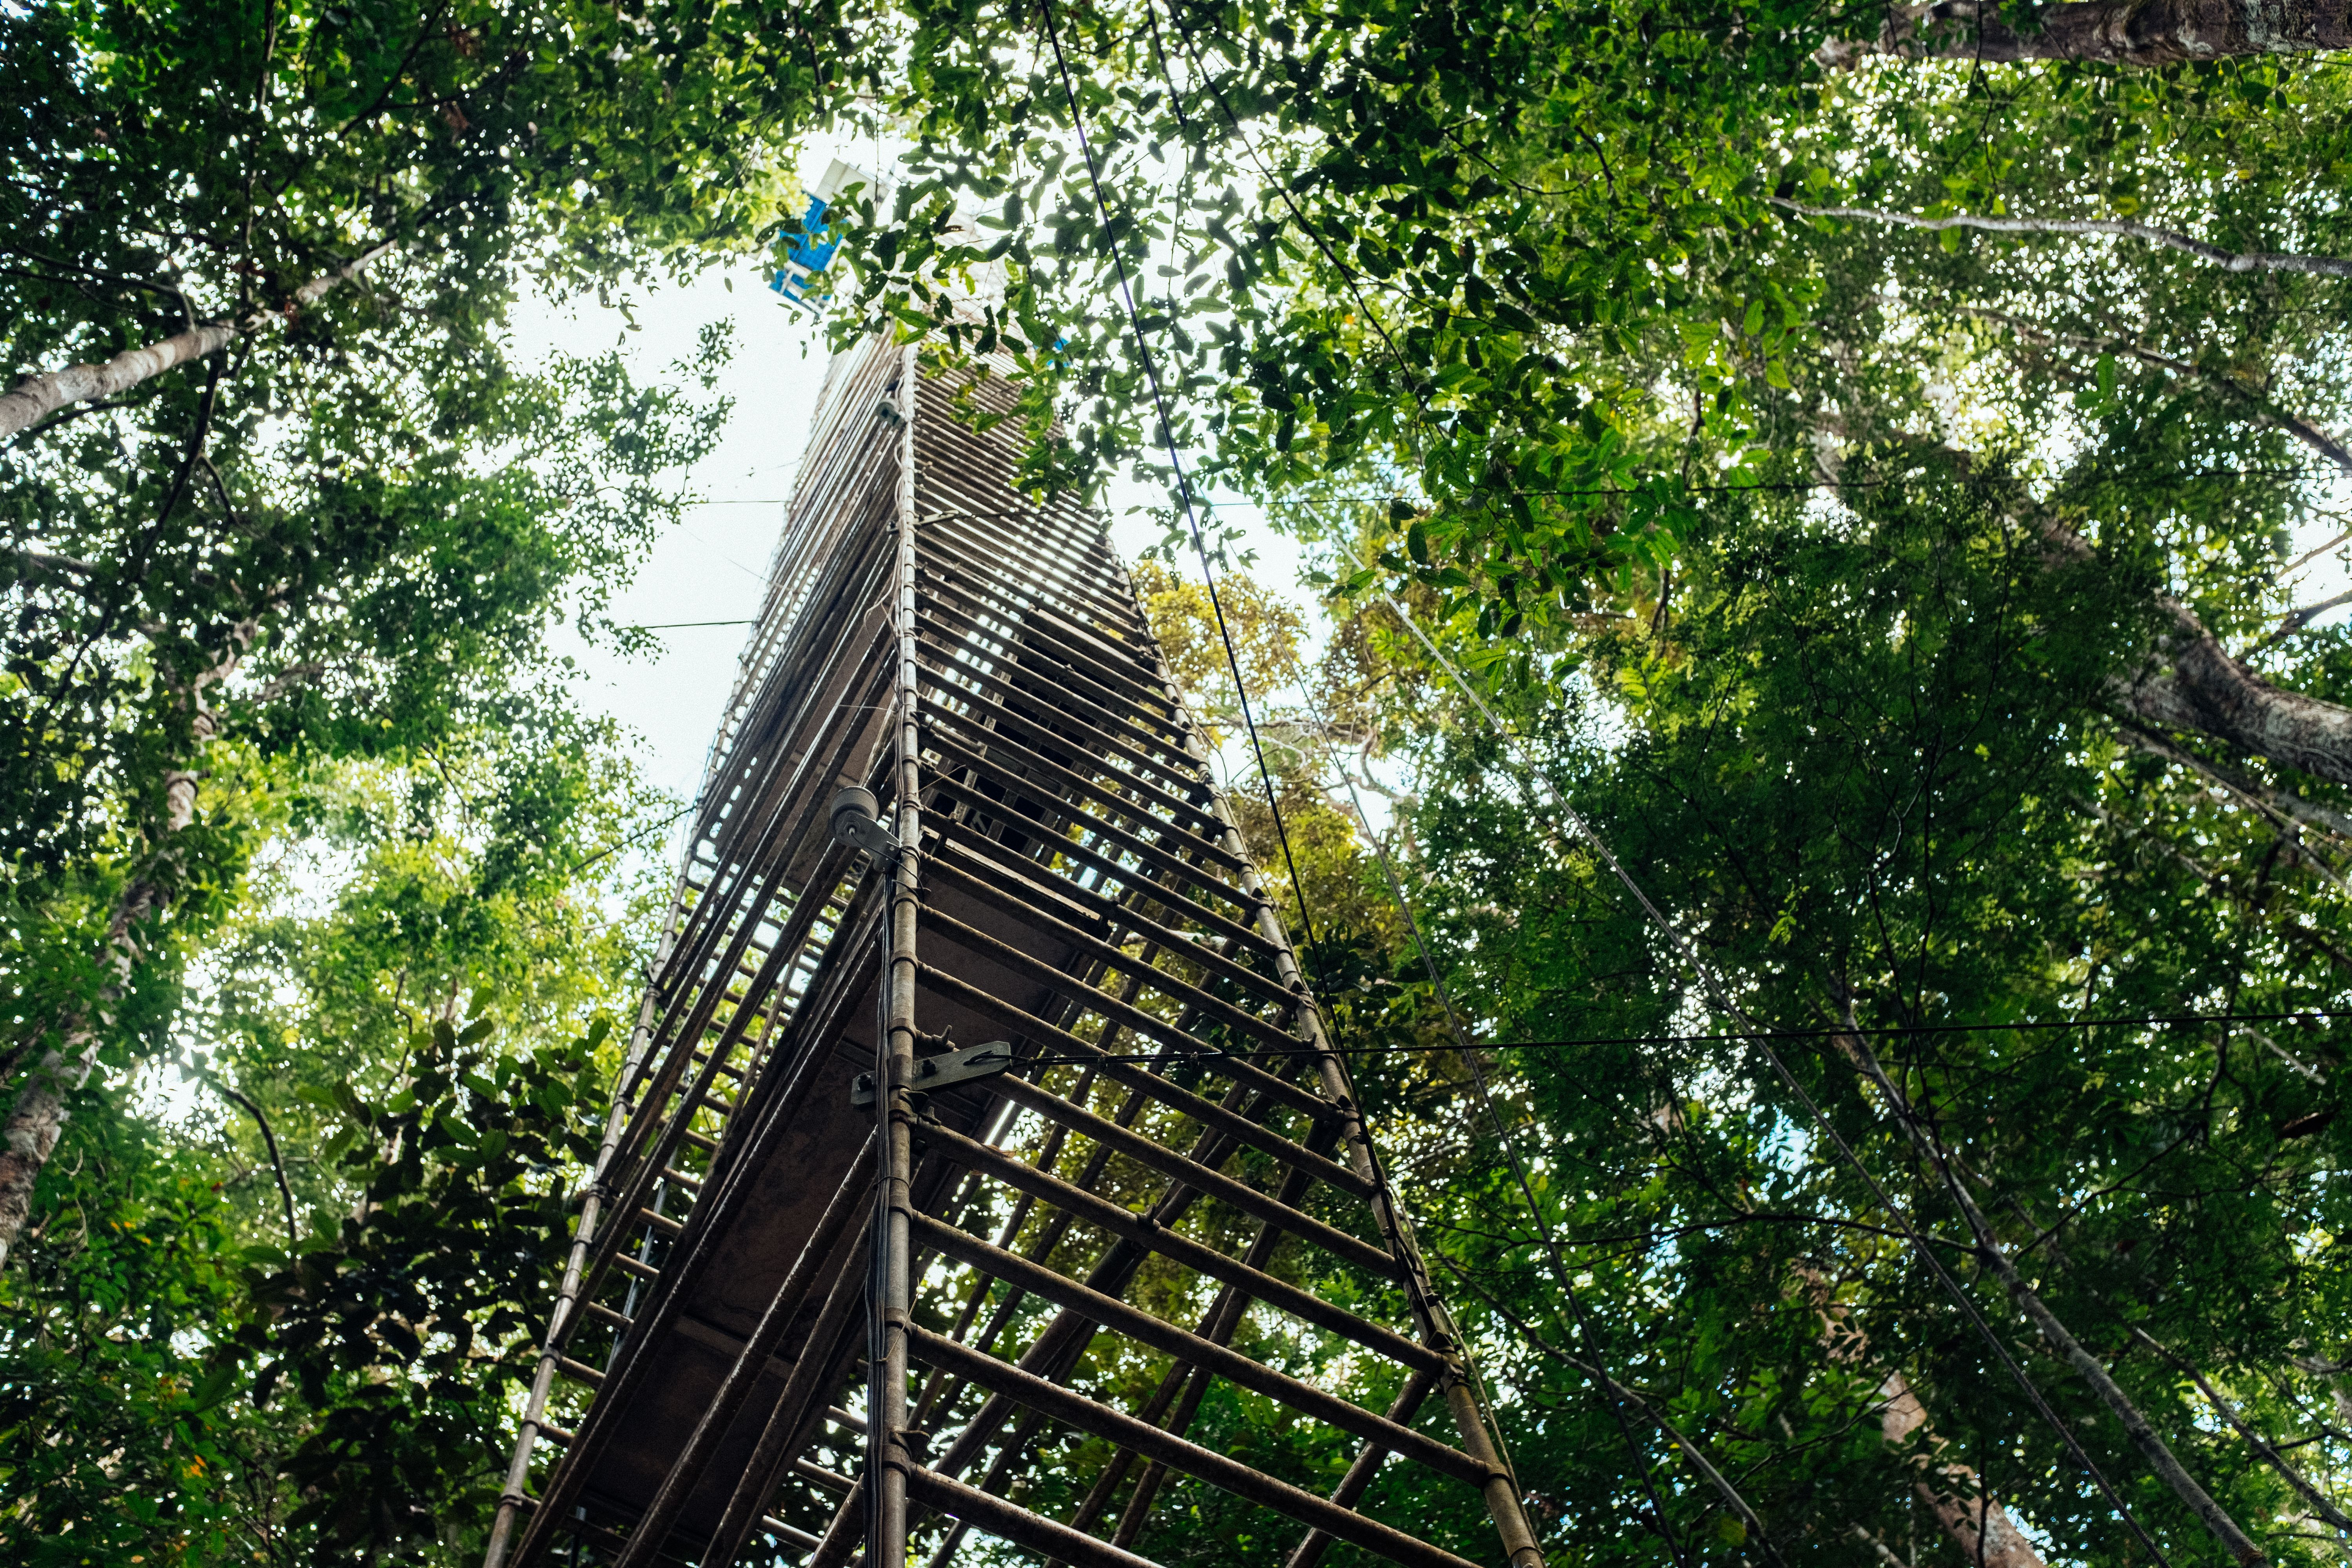 Research towers in pristine Amazon forest allow scientists to access every layer of the tree canopy in order to document the forest's carbon cycle and how it’s changing. Image by Sam Eaton. Brazil, 2018.

